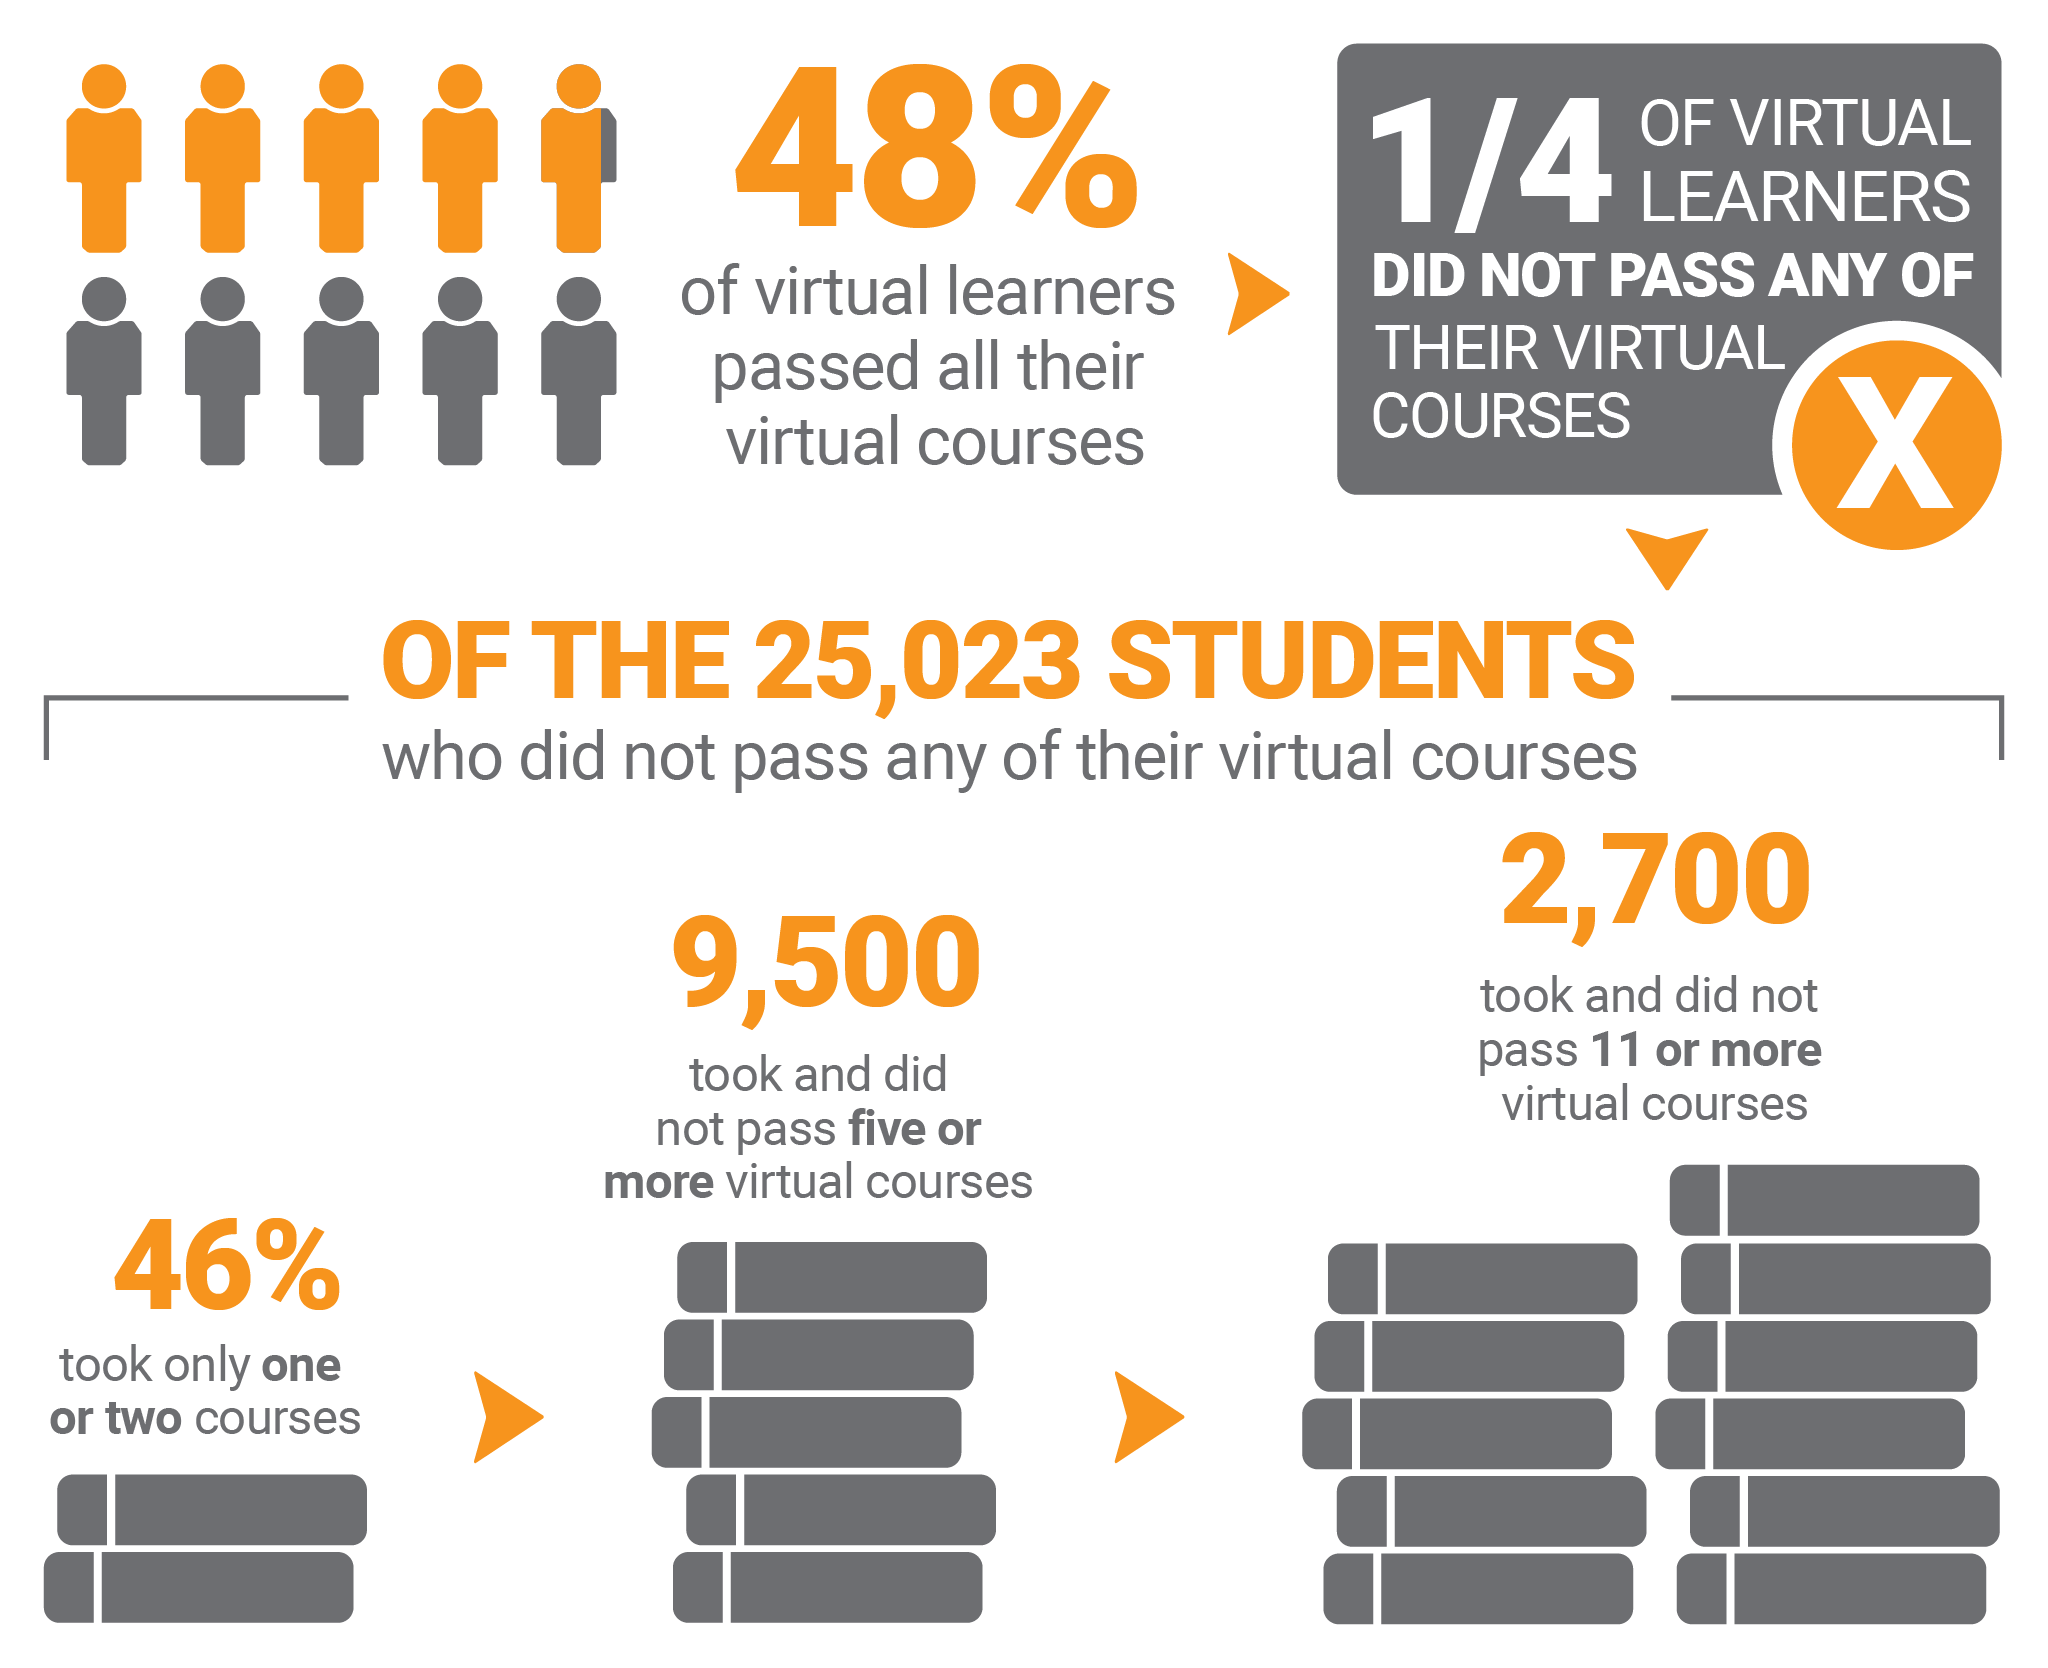 48 percent of virtual learners passed all of their virtual courses. 1/4 of virtual learners did not pass any of their virtual courses. Of the 25,023 students who did not pass any of their virtual courses, 46 percent took only one or two courses, 9,500 took and did not pass five or more virtual courses, and 2,700 took and did not pass 11 or more virtual courses.